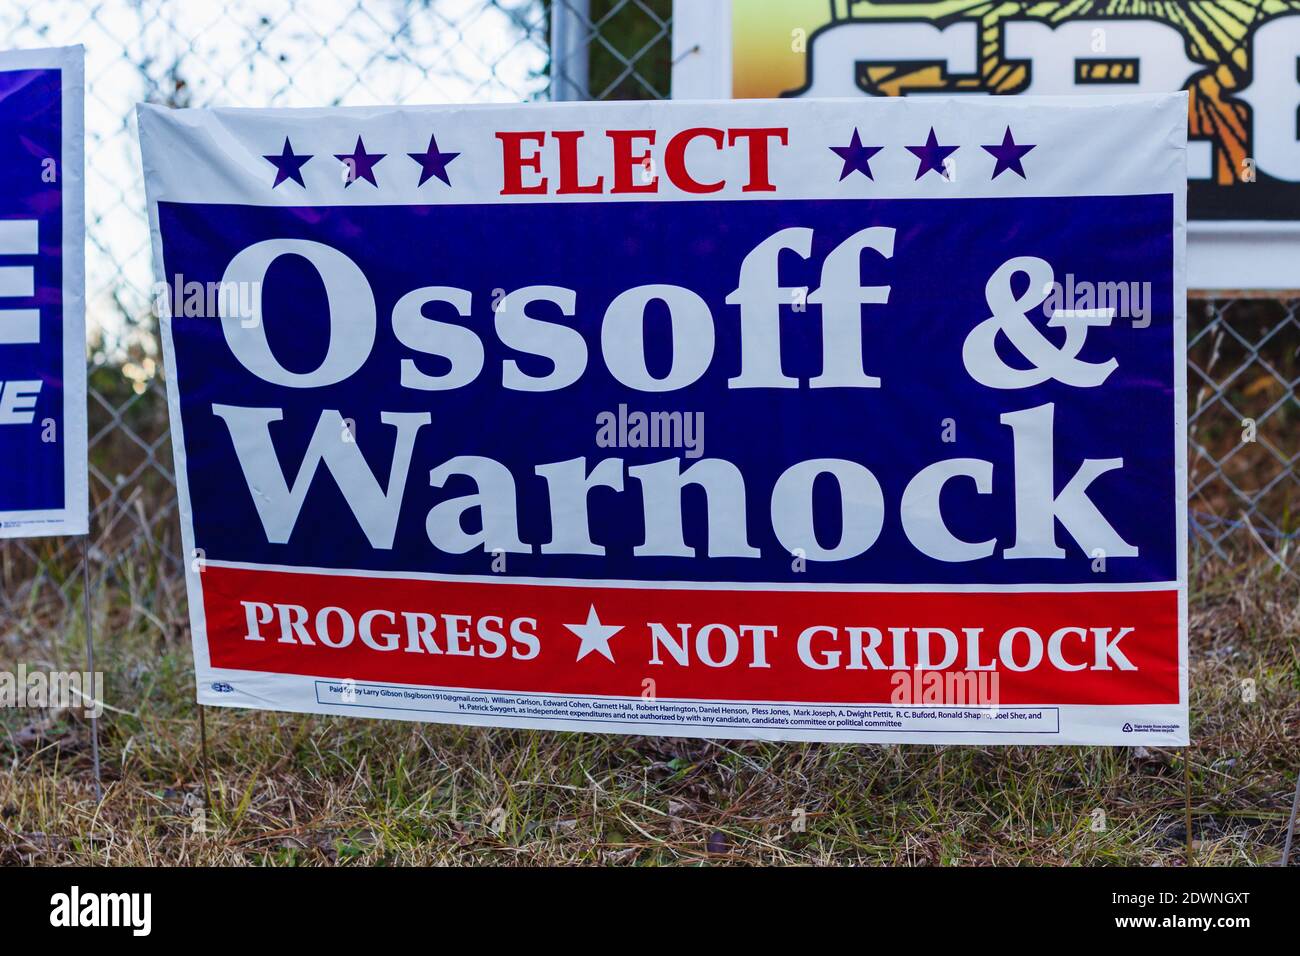 LAWRENCEVILLE, UNITED STATES - Dec 22, 2020: Lawrenceville, Georgia | United States - December 22 2020: Georgia Senate runoff election signs along the Stock Photo